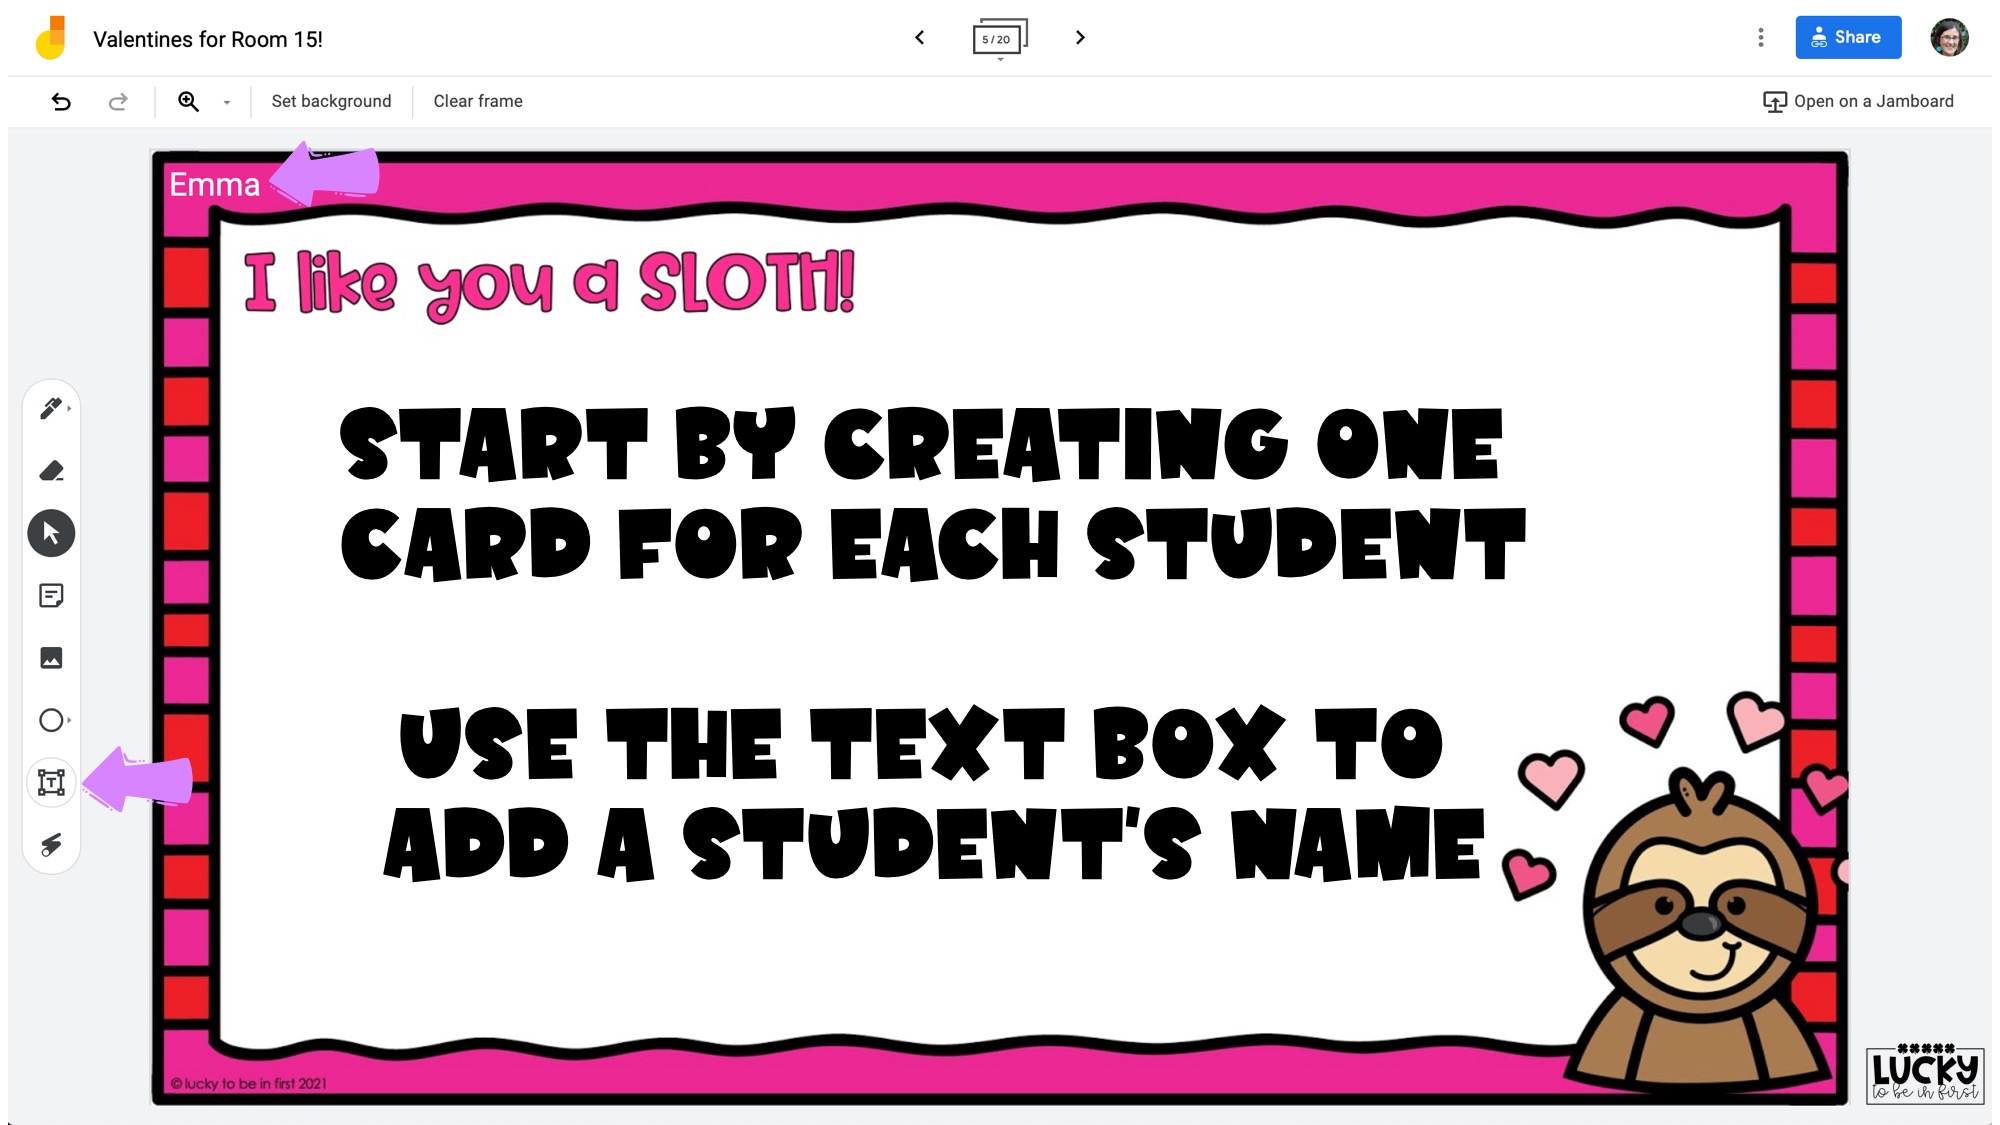 example of a digital valentine for students in elementary school | Lucky Learning with Molly Lynch 